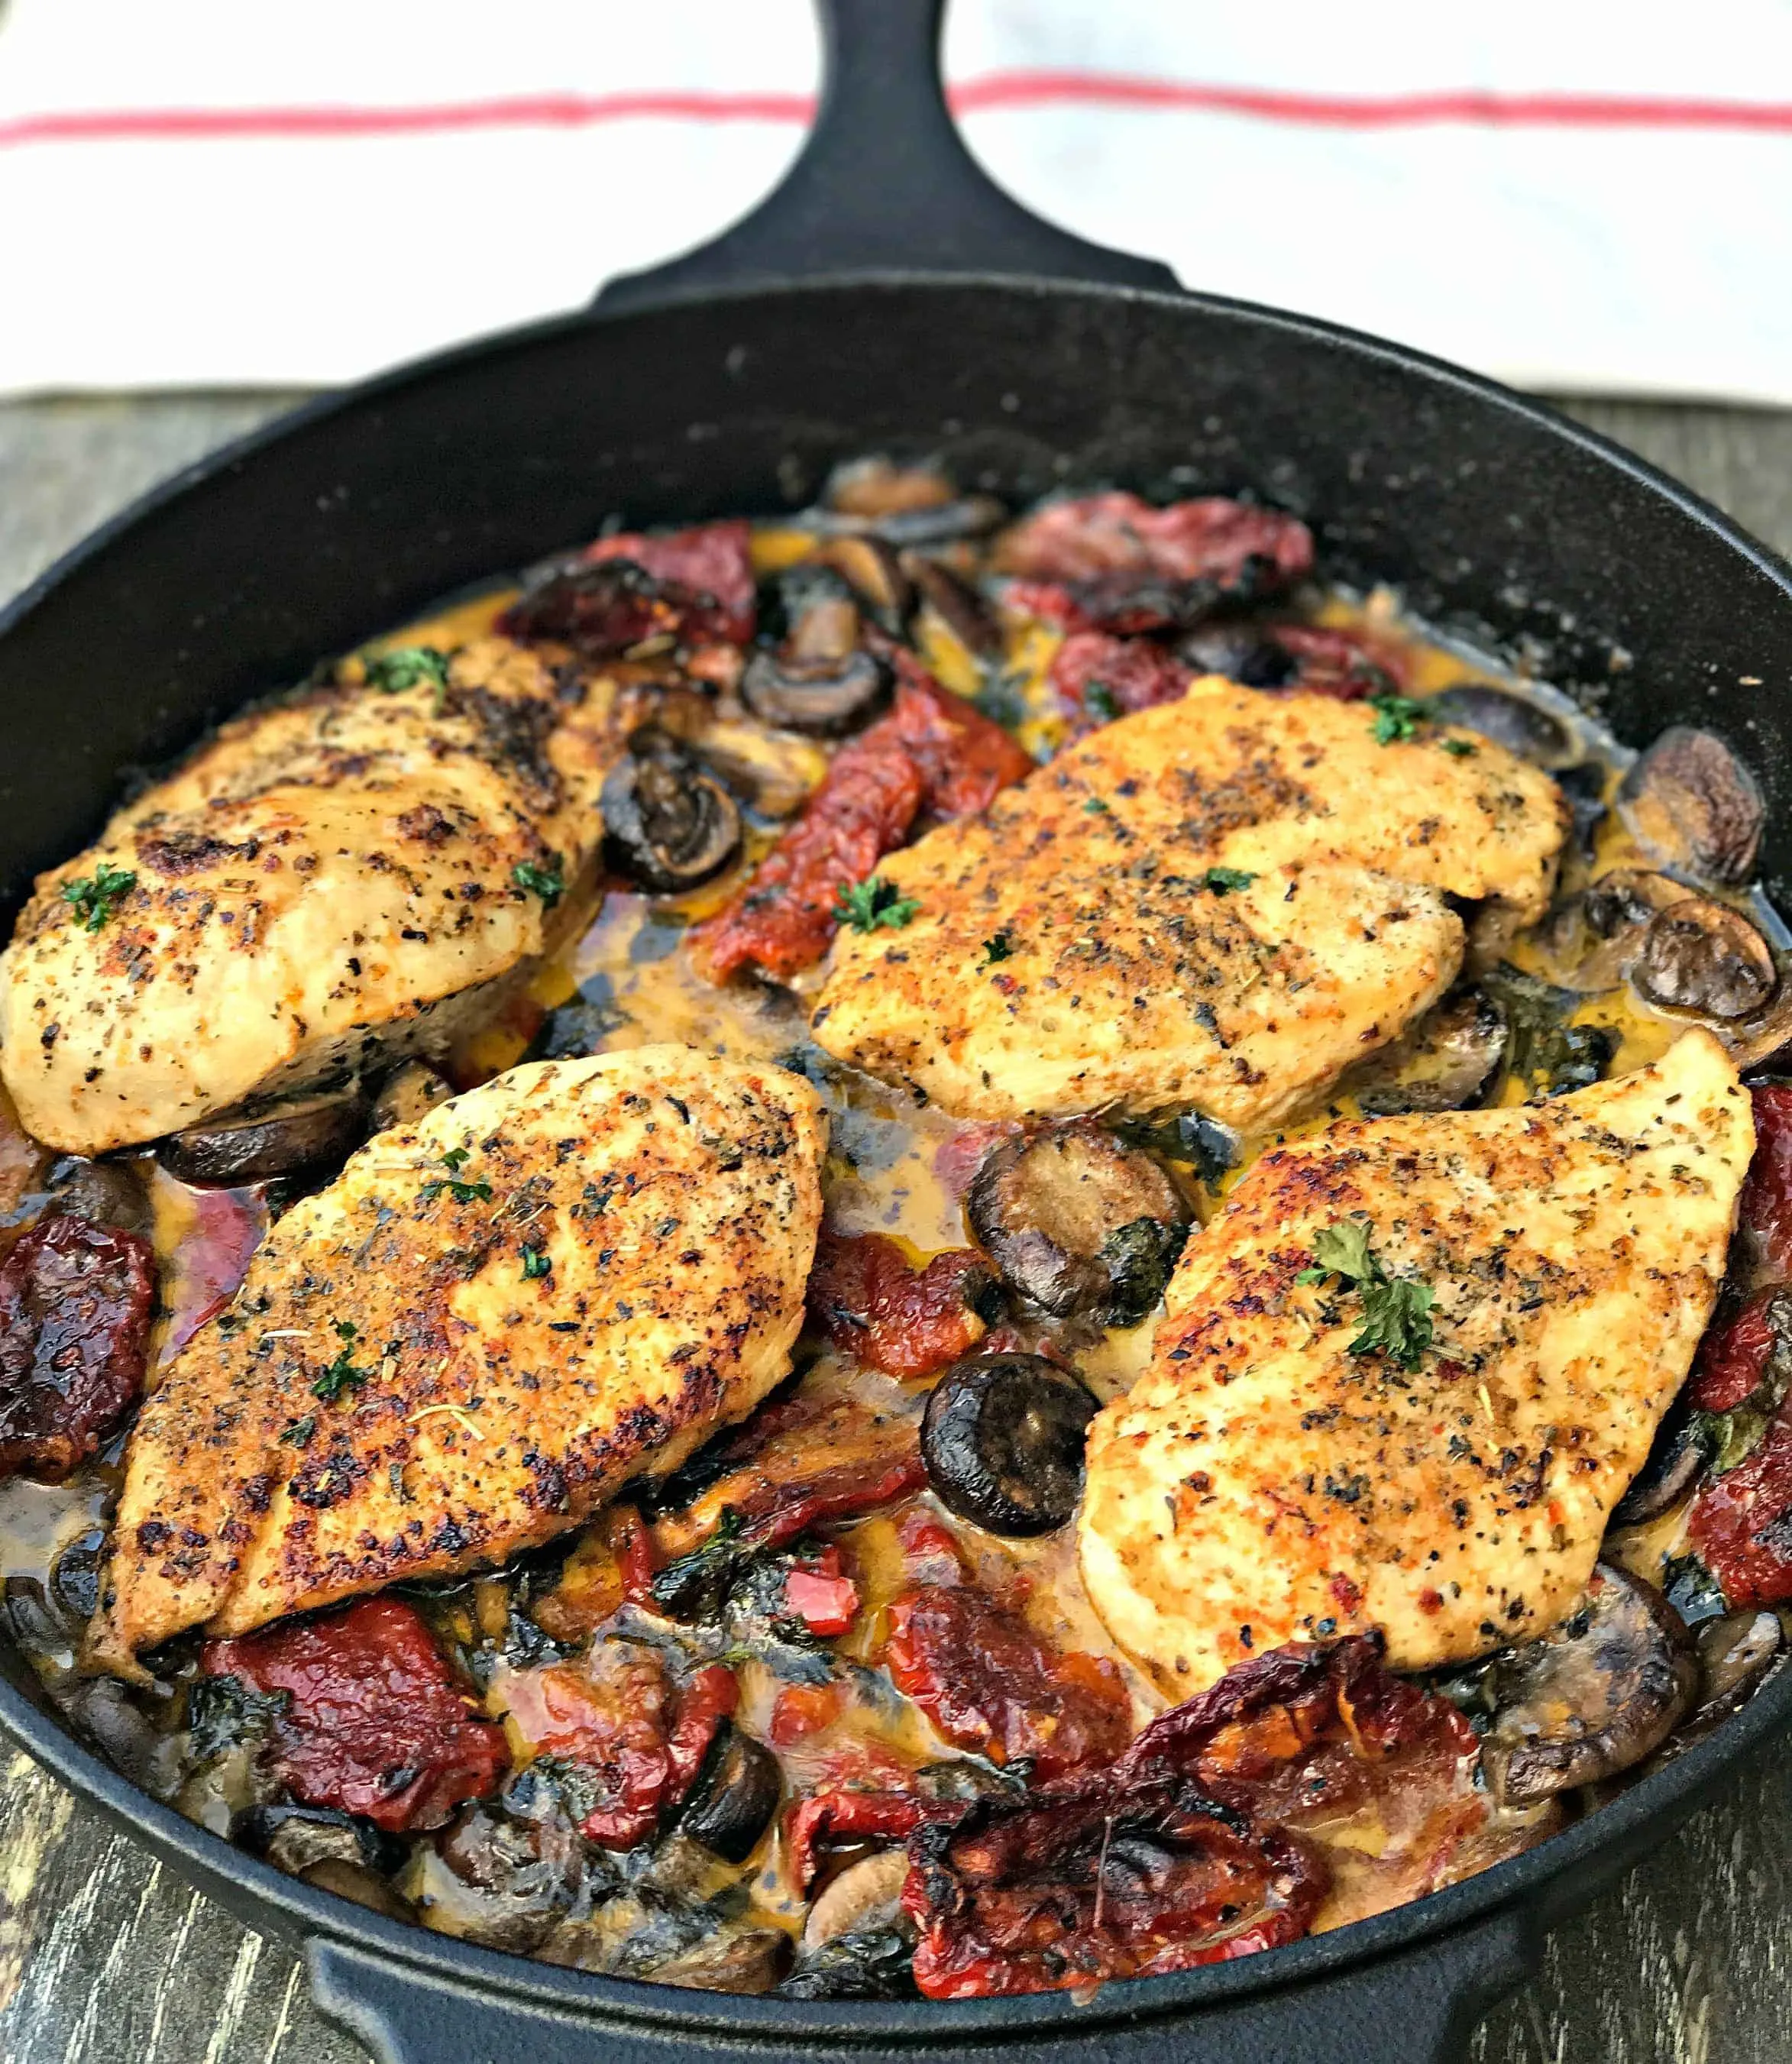 Chicken with Sun-Dried Tomatoes and Mushrooms in White Wine Cream Sauce in a skillet